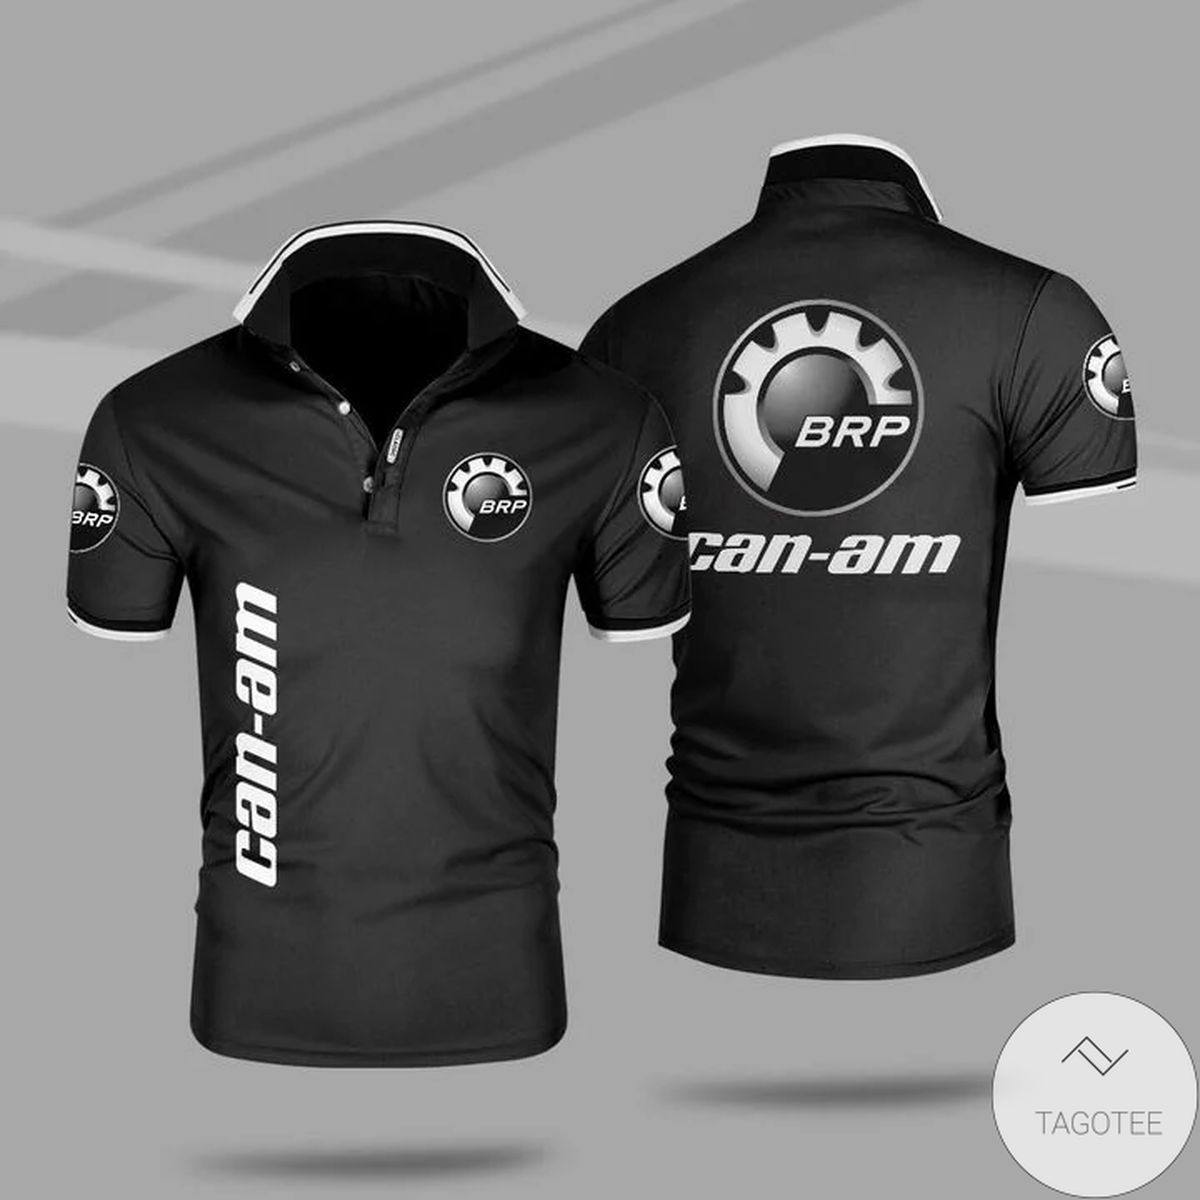 Can-am Motorcycles Polo Shirt